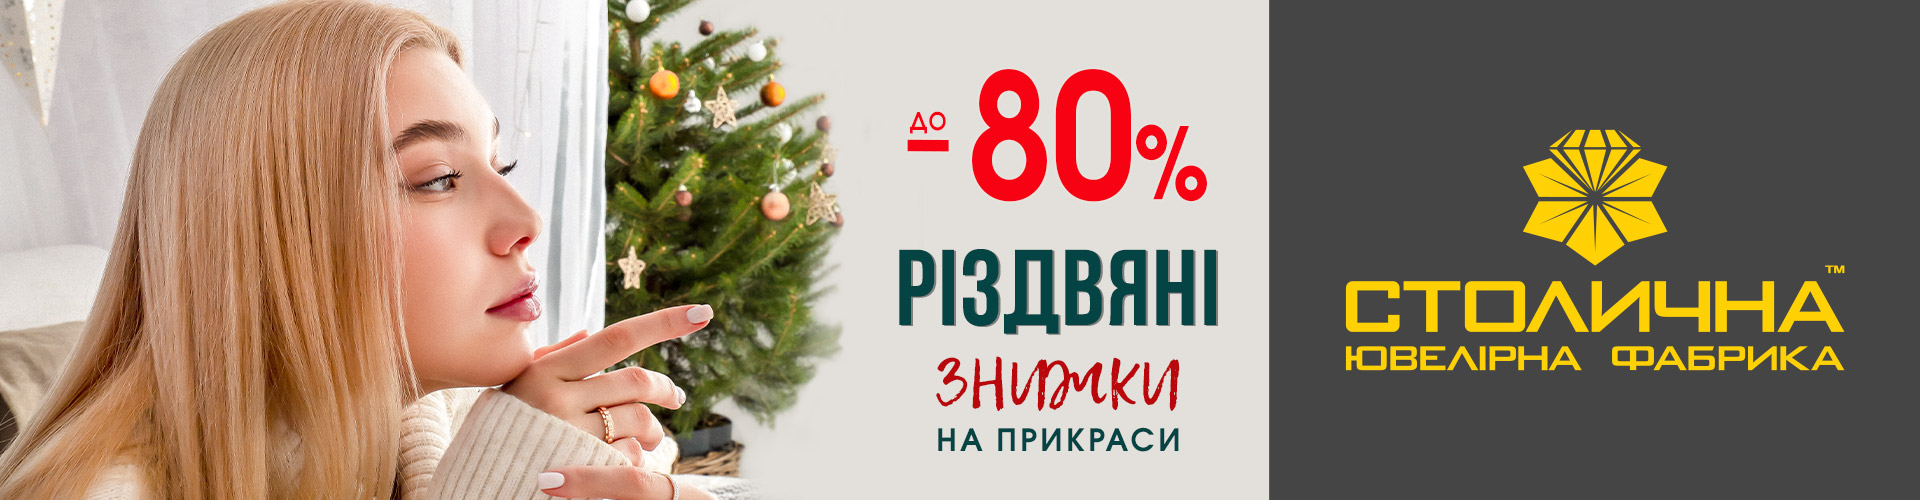 CHRISTMAS DISCOUNTS up to -80% in CJF